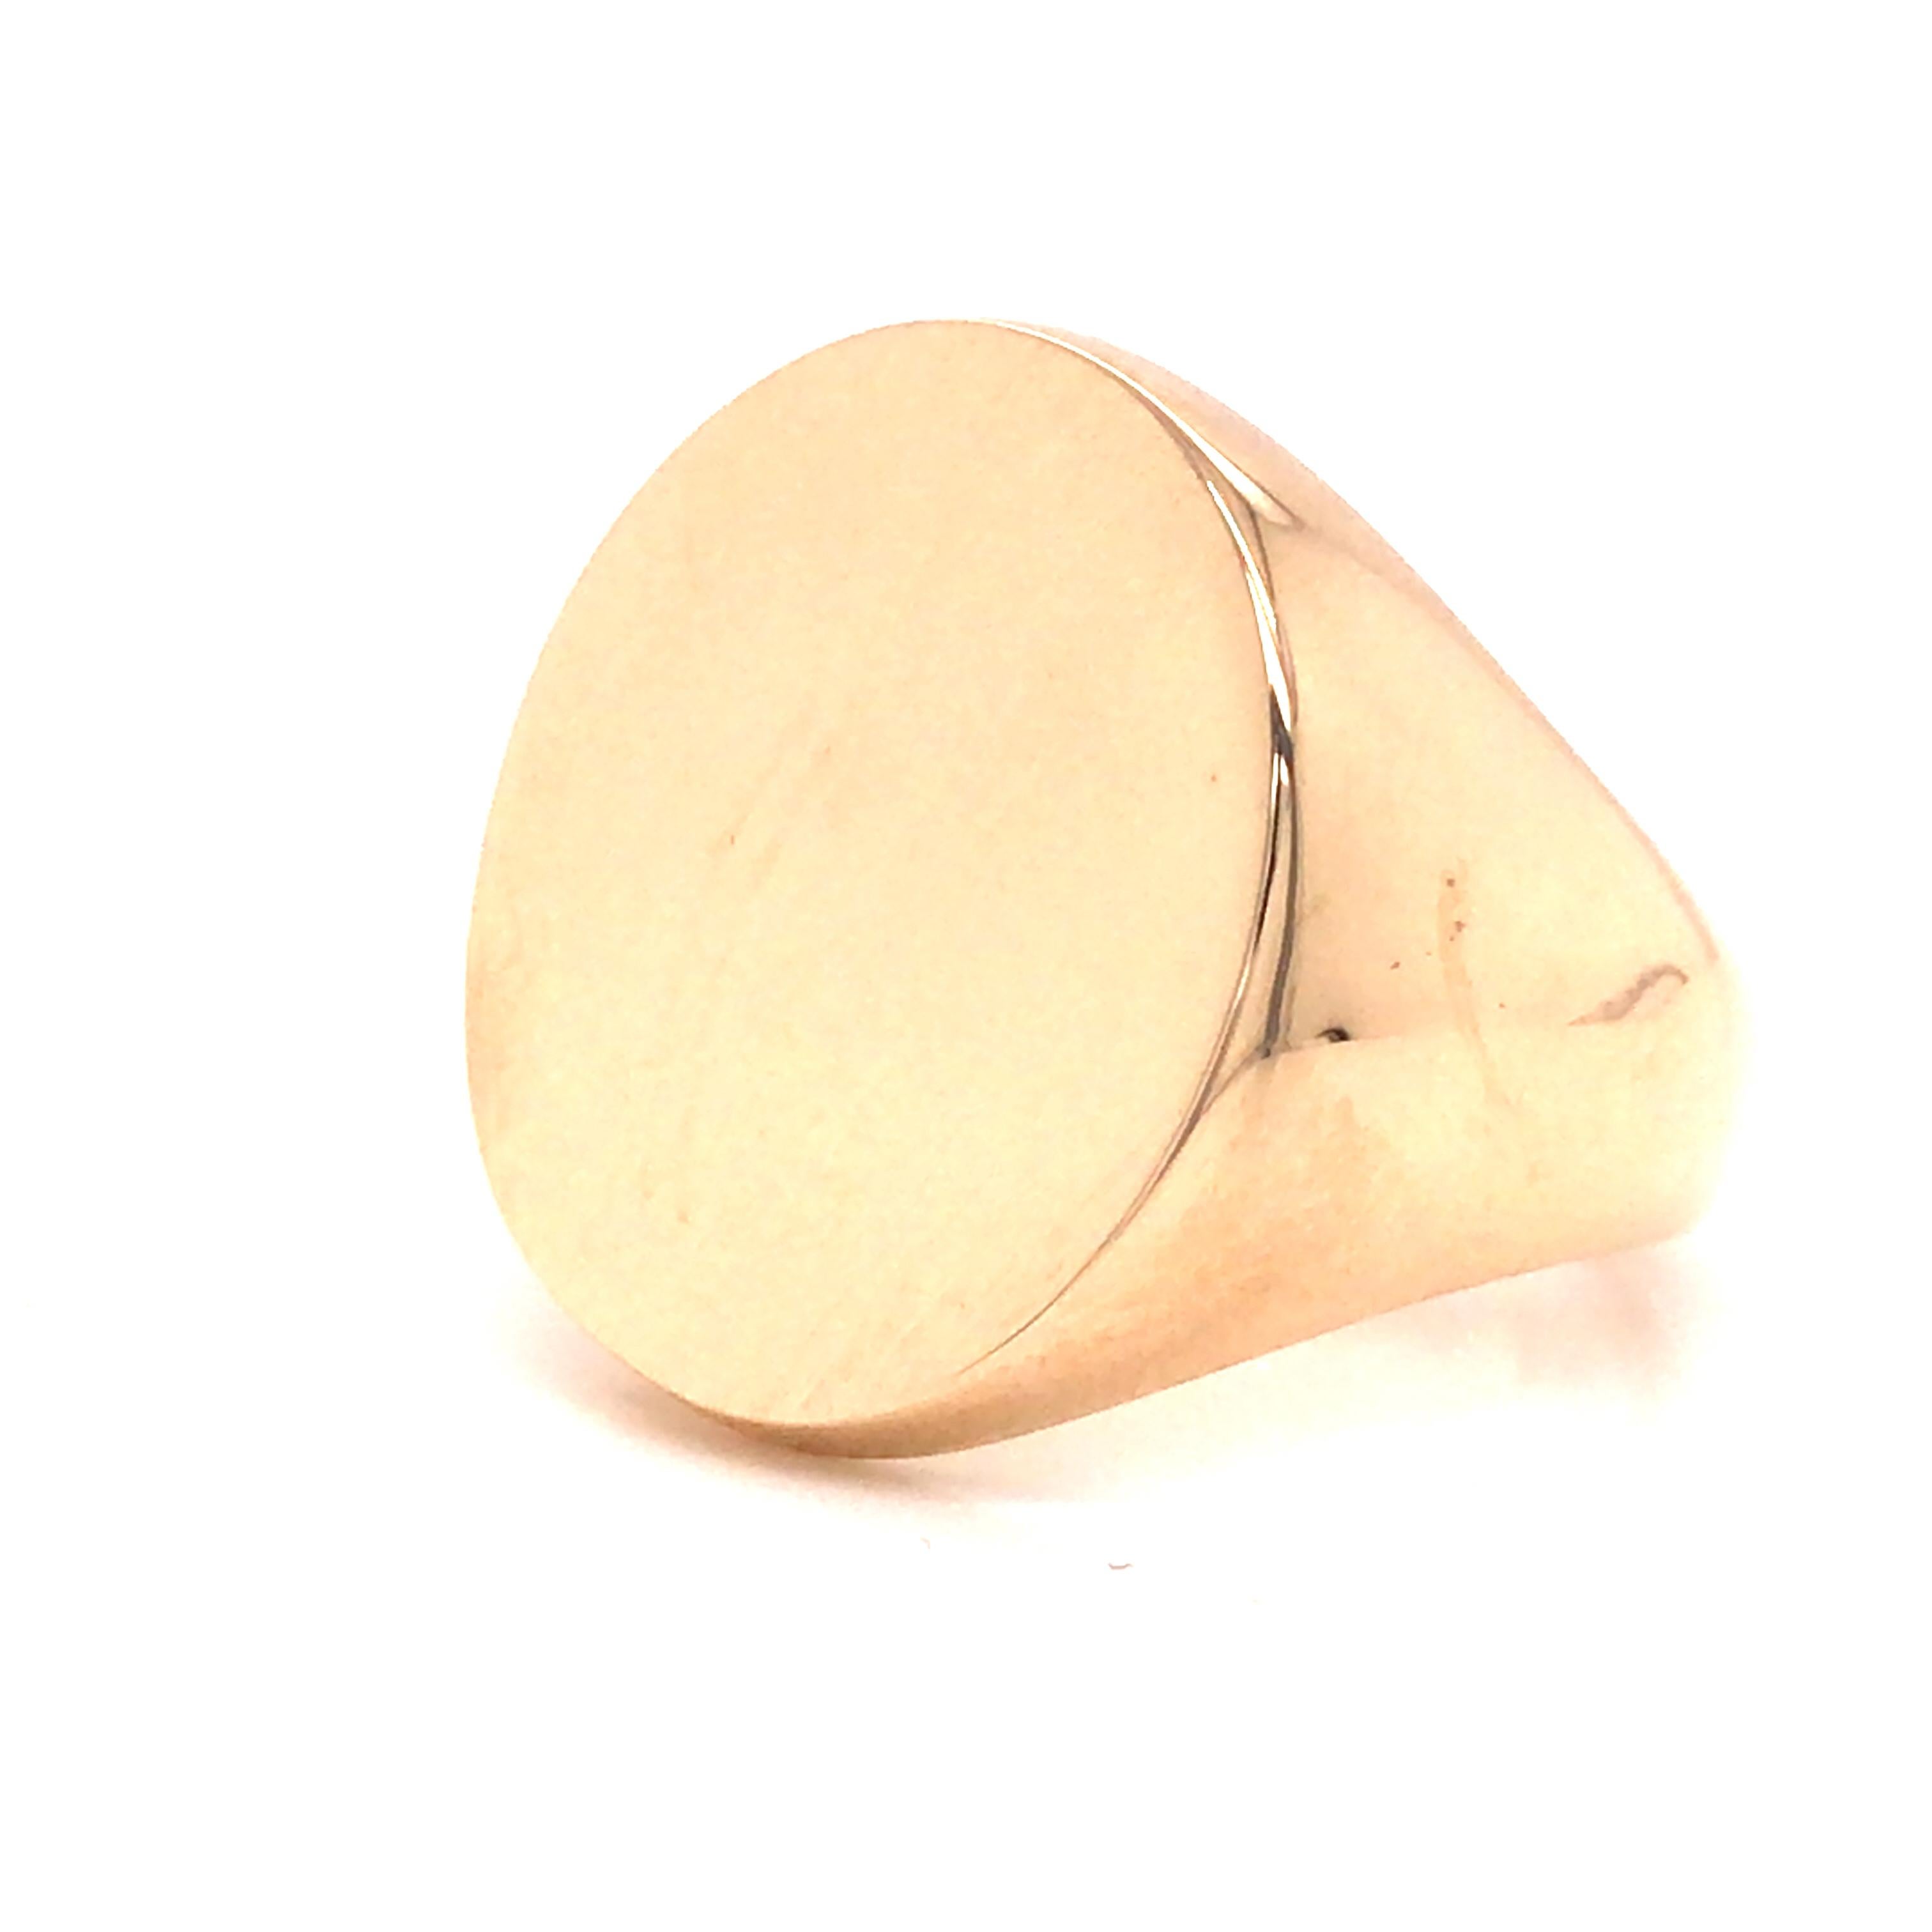 Tiffany & Co.  Signet Ring in 18K Yellow Gold.  The Ring measures 13/16 in length and 11/16 inch in width.  Stamped 